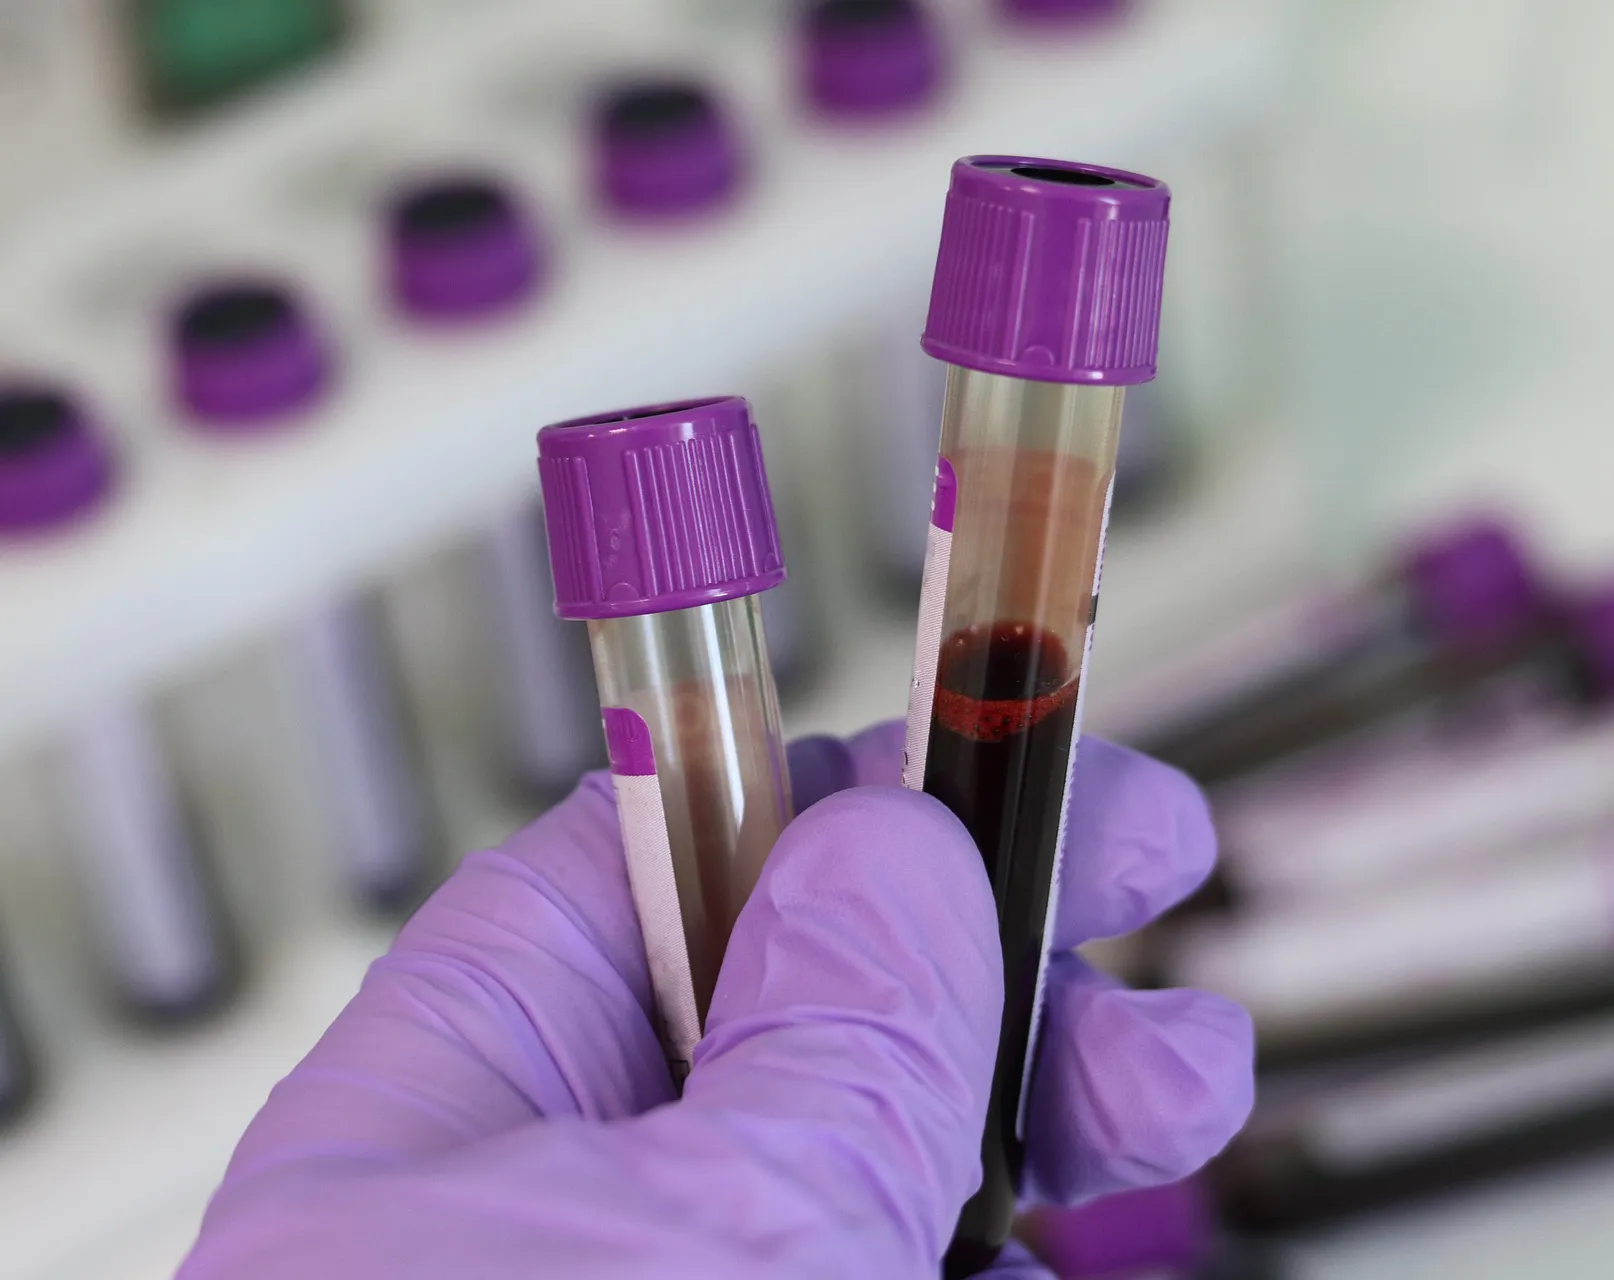 Image showing two vials of blood in a researchers hand